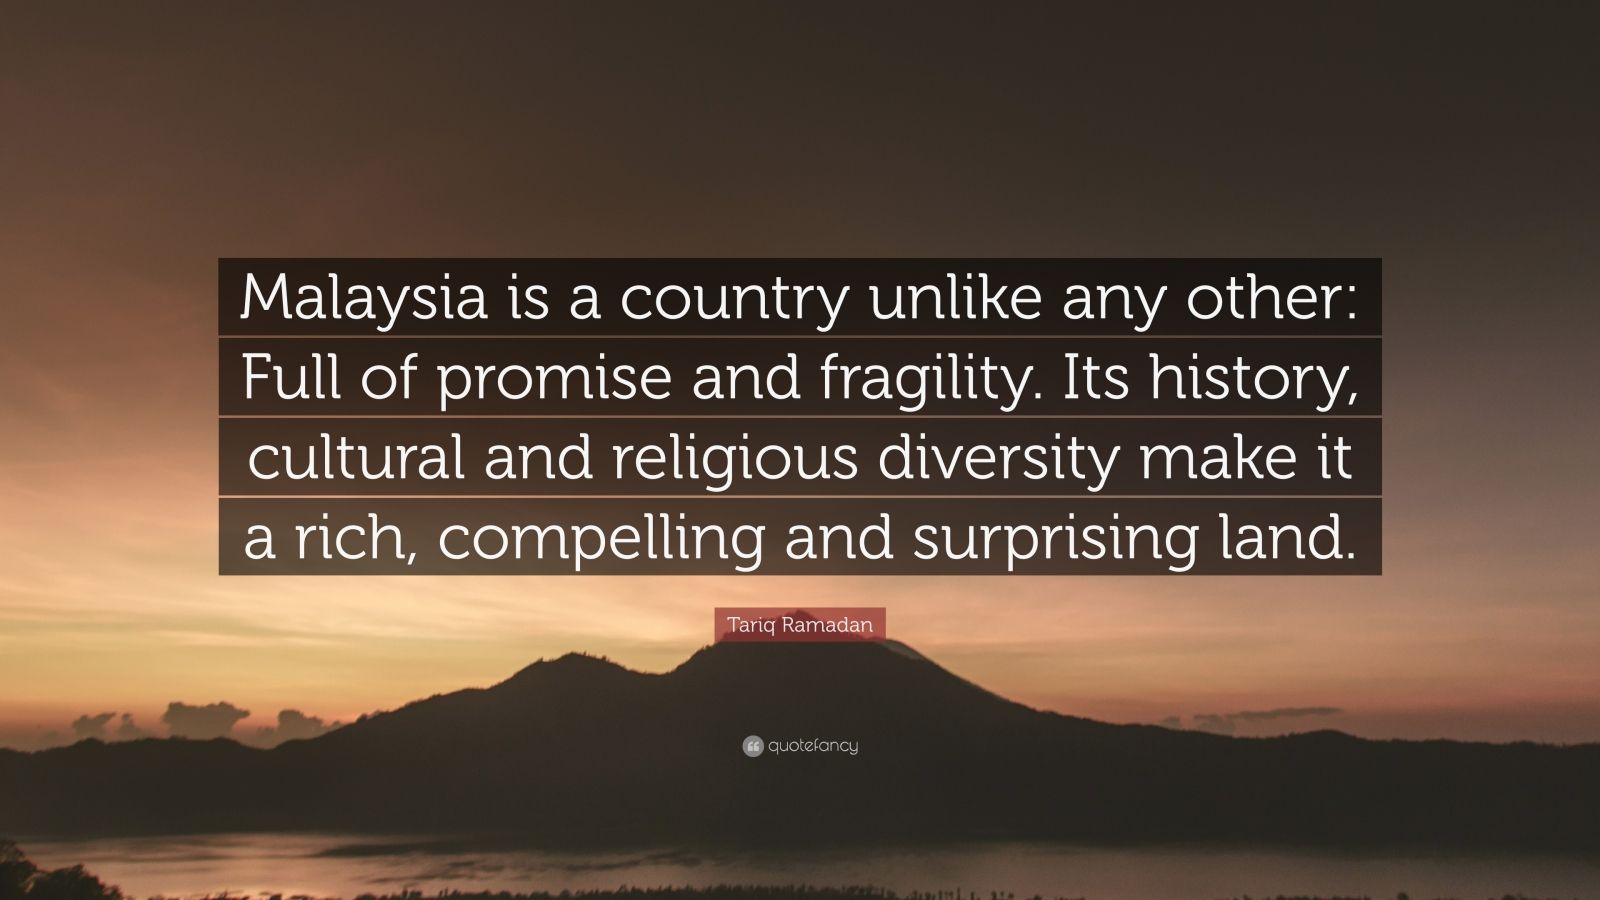 Tariq Ramadan Quote: “Malaysia is a country unlike any other: Full of